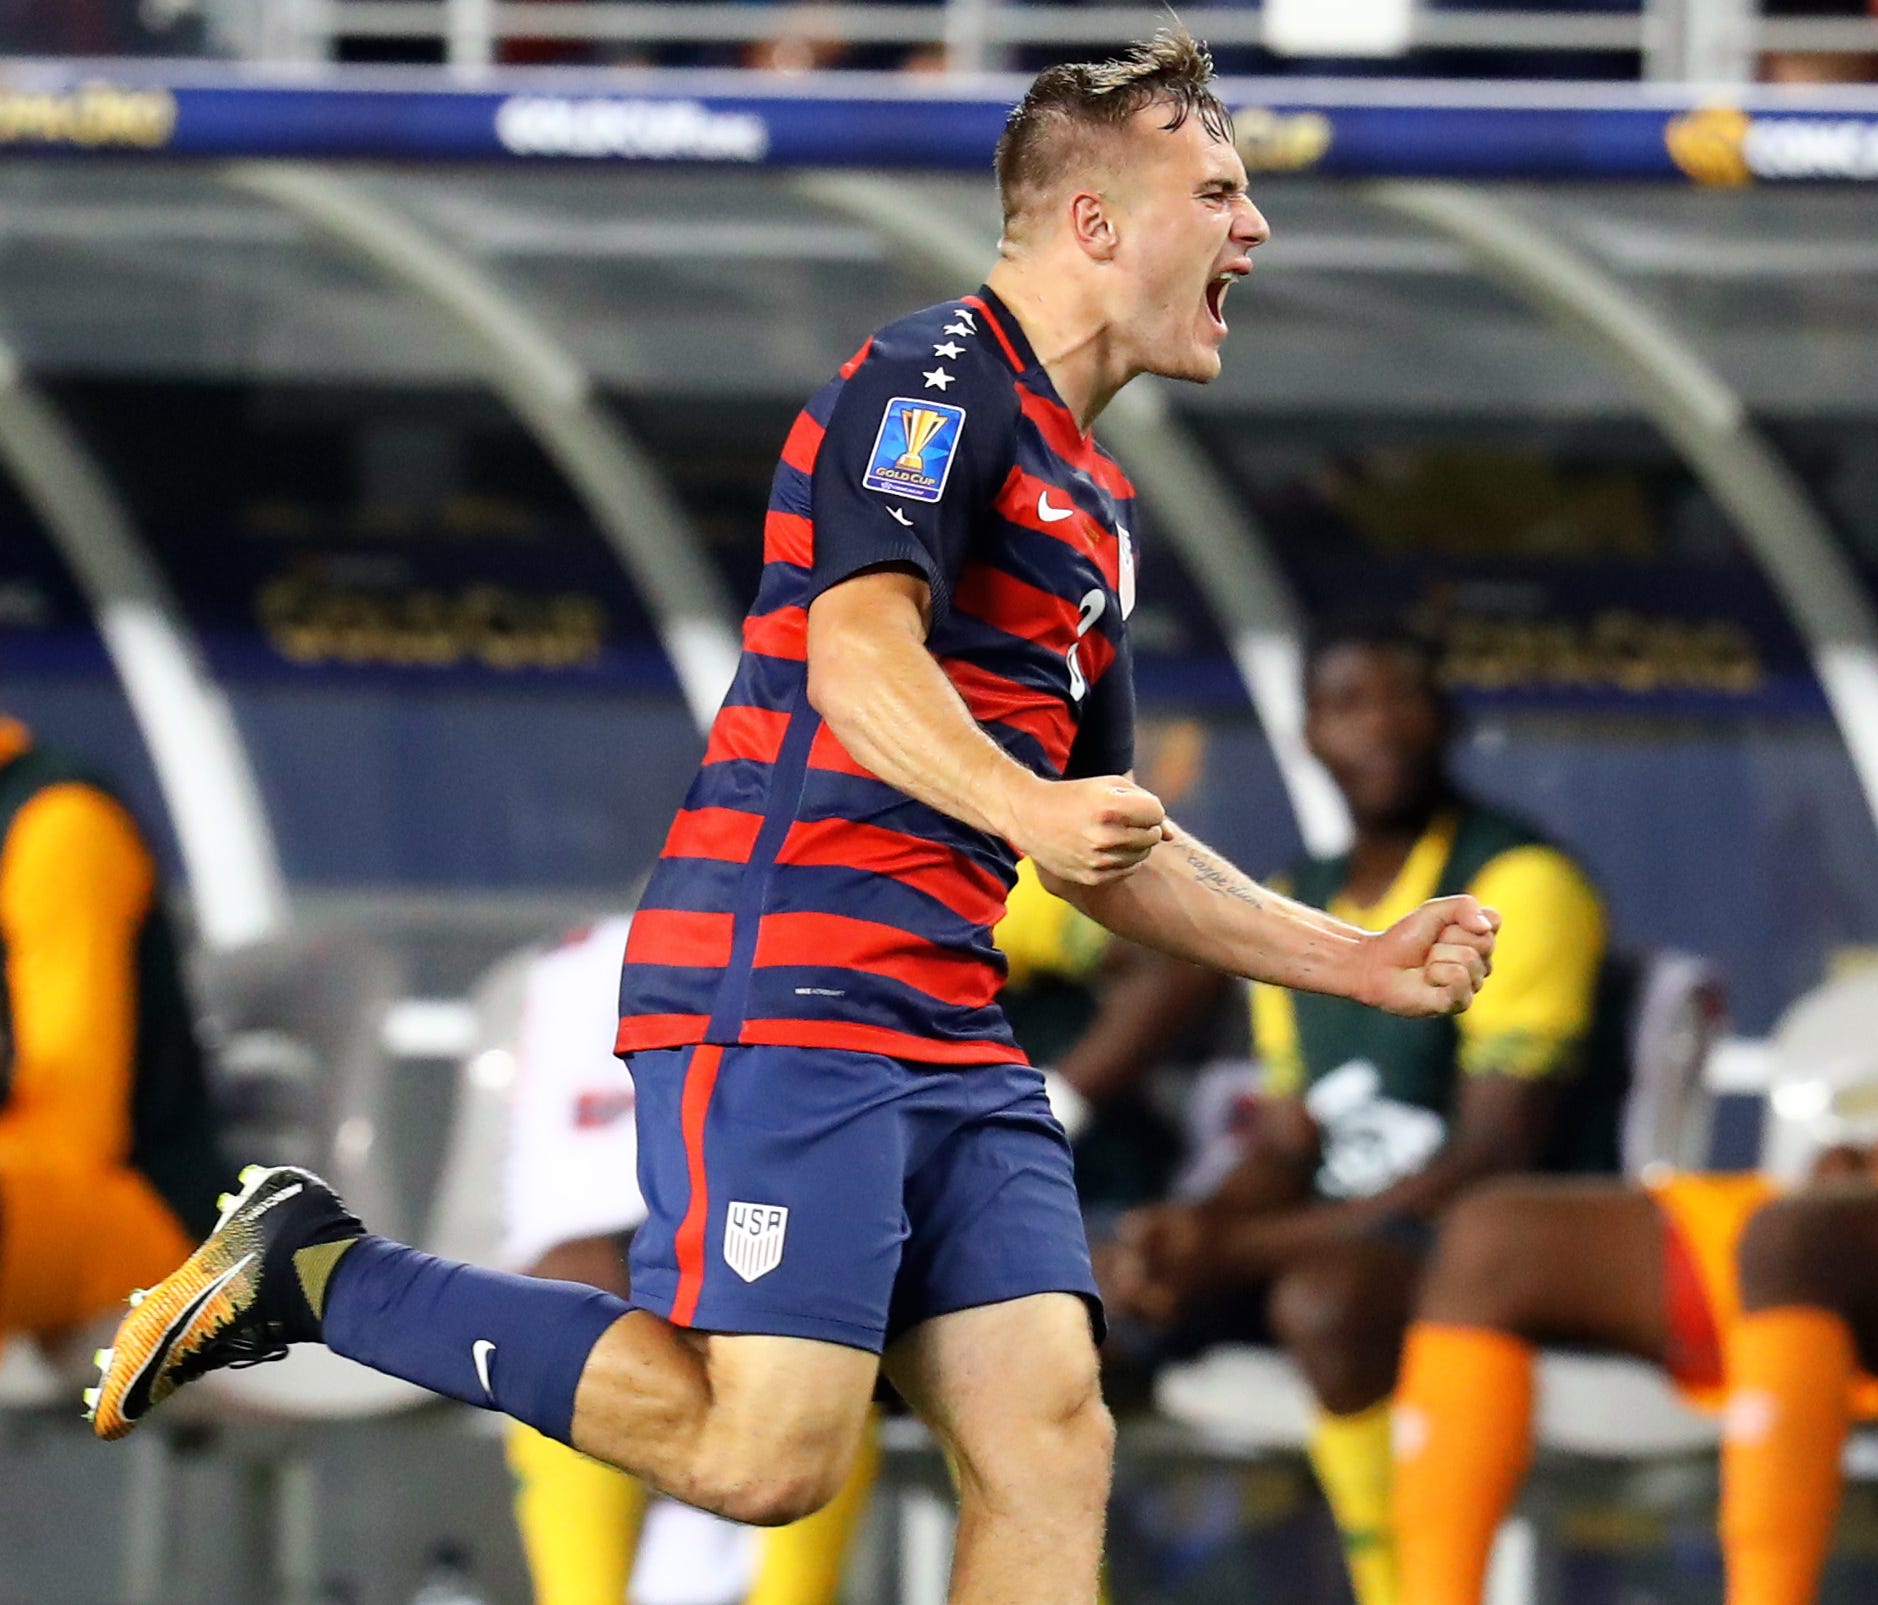 Jordan Morris celebrates after scoring the winning goal against Jamaica during the second half of the Gold Cup final.